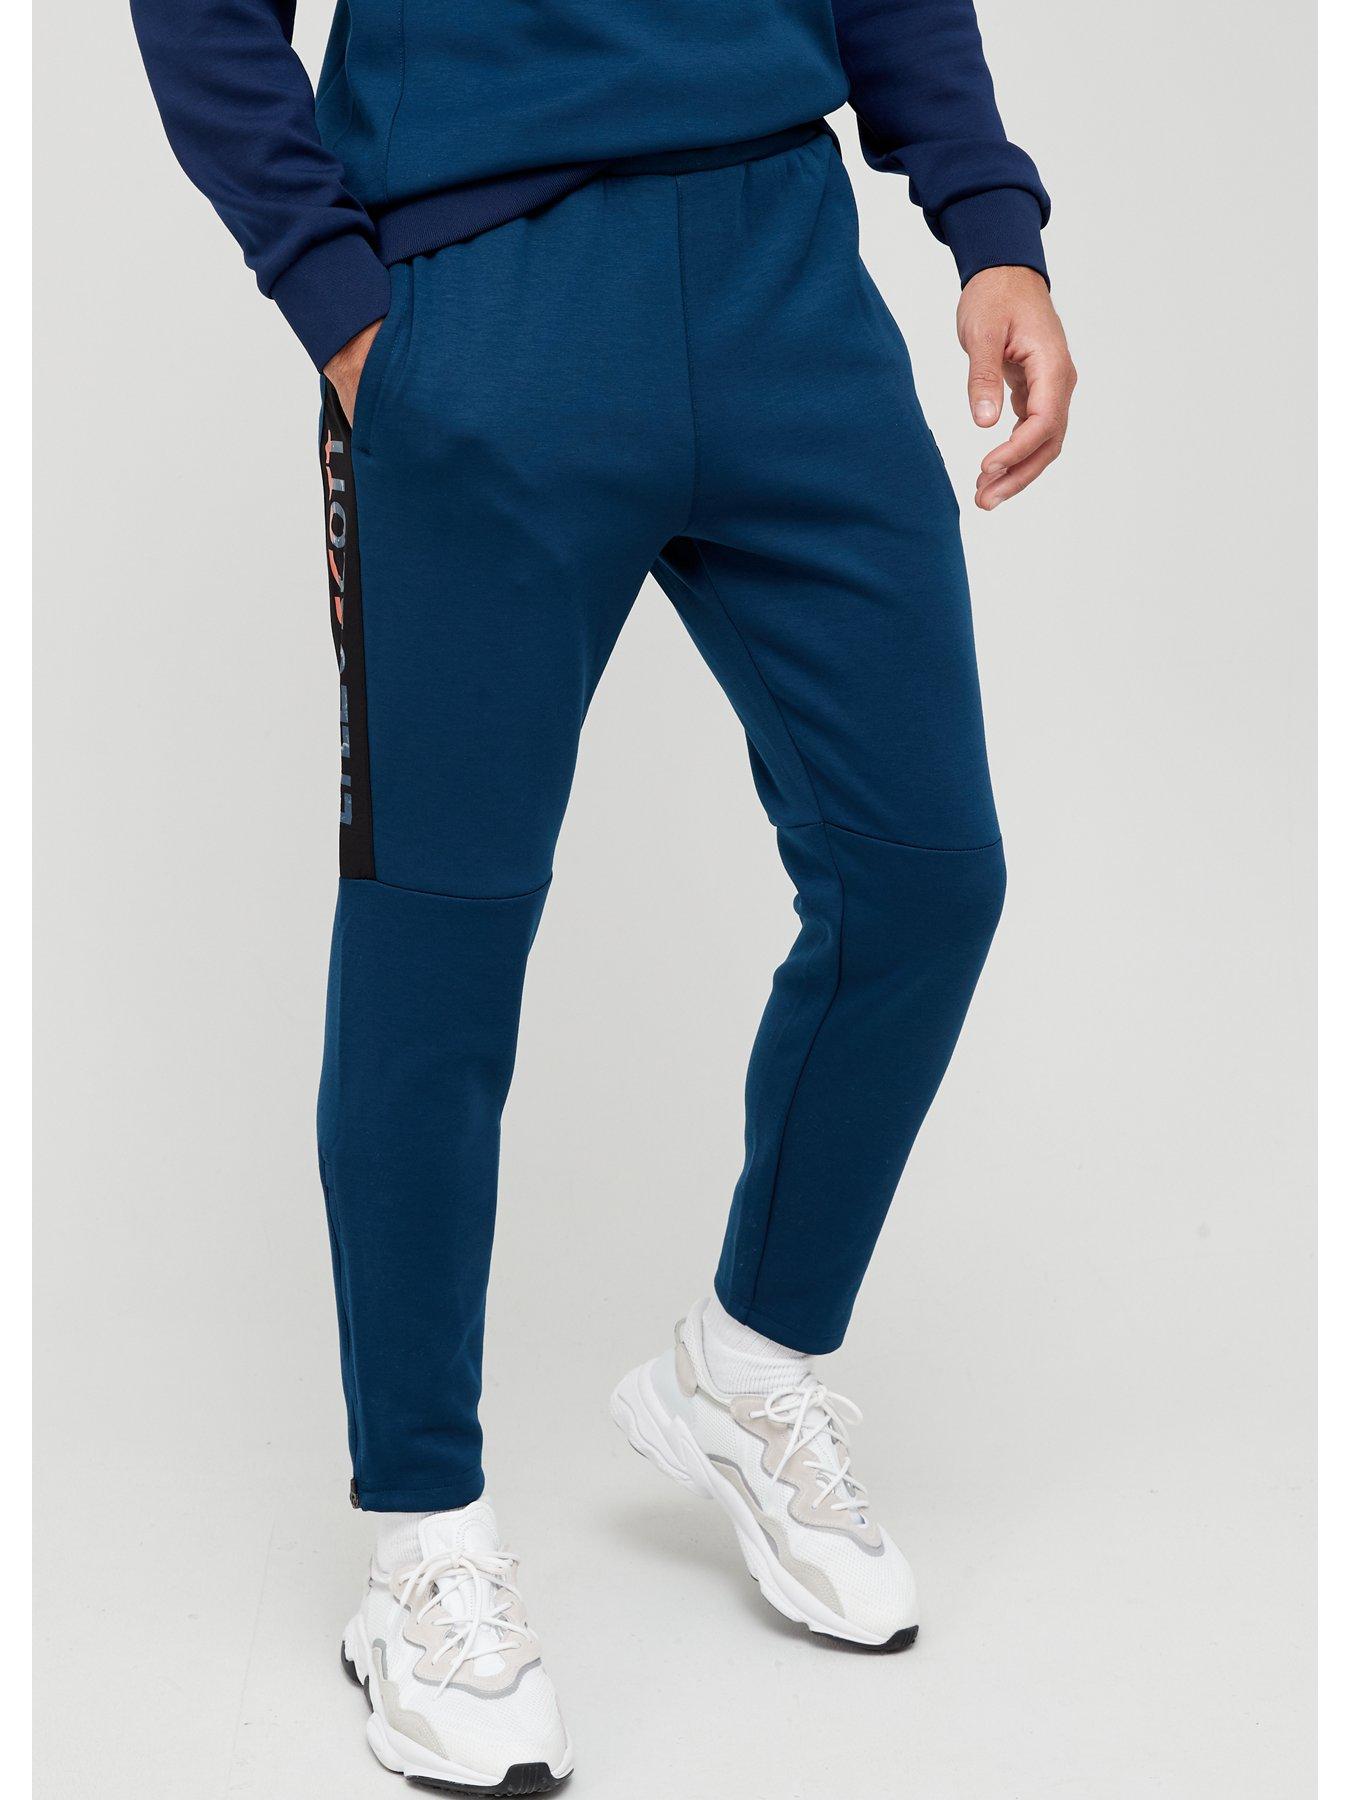 Men Tracksuit Bottoms with Woven Overlay - Blue